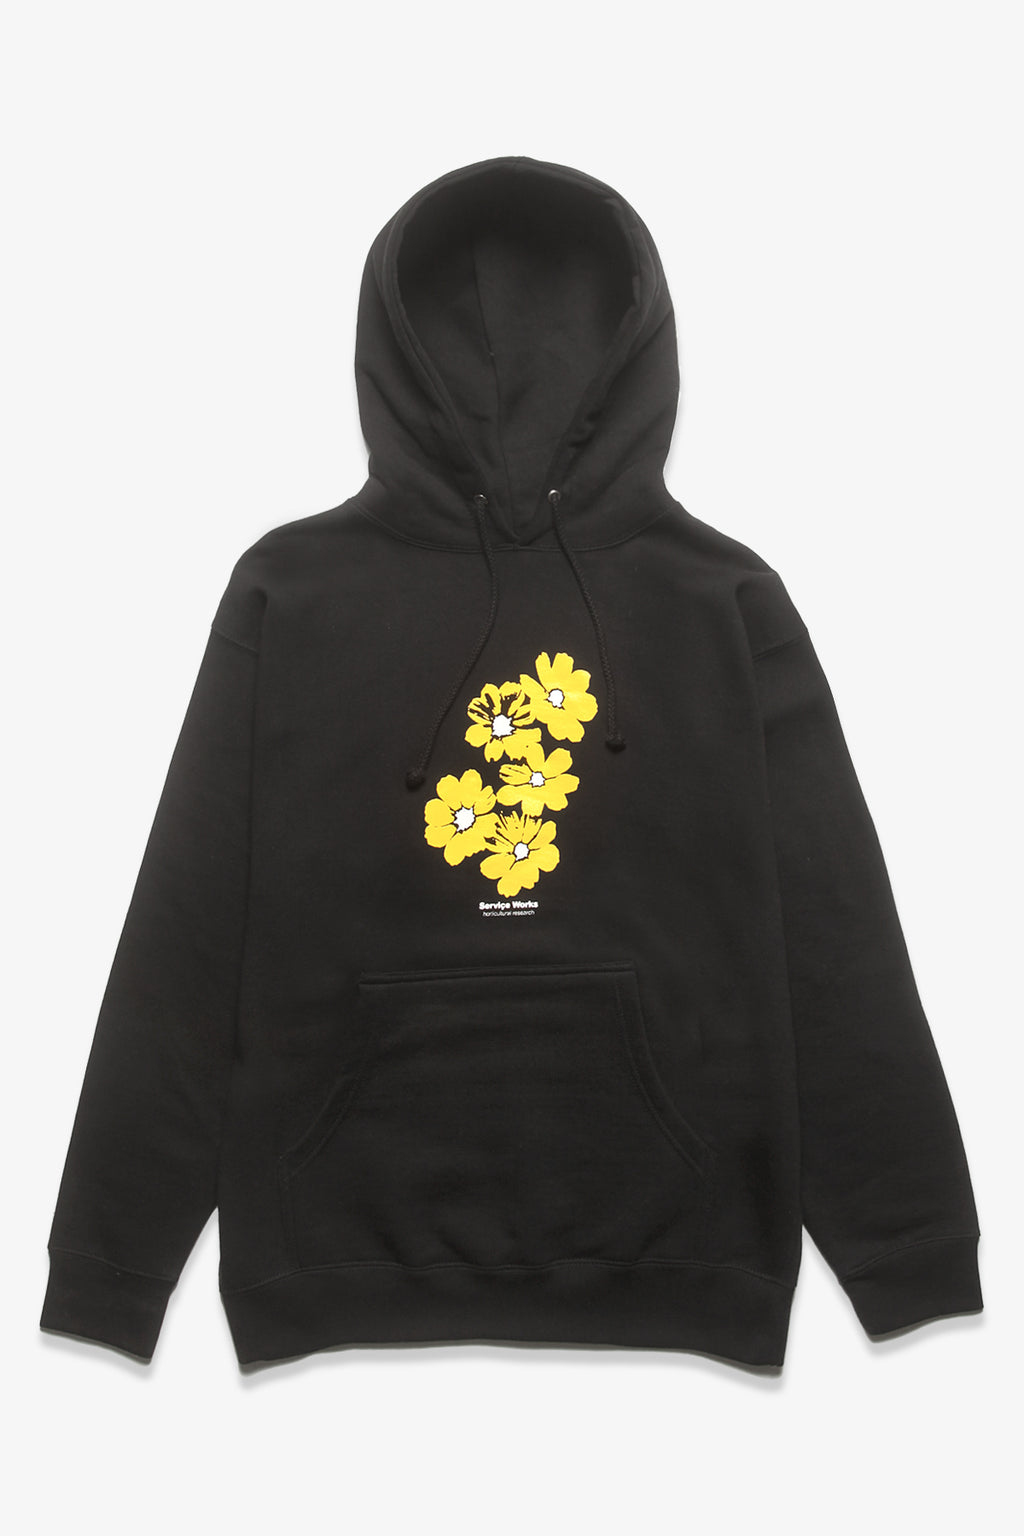 Service Works - Horticultural Research Hoodie - Black